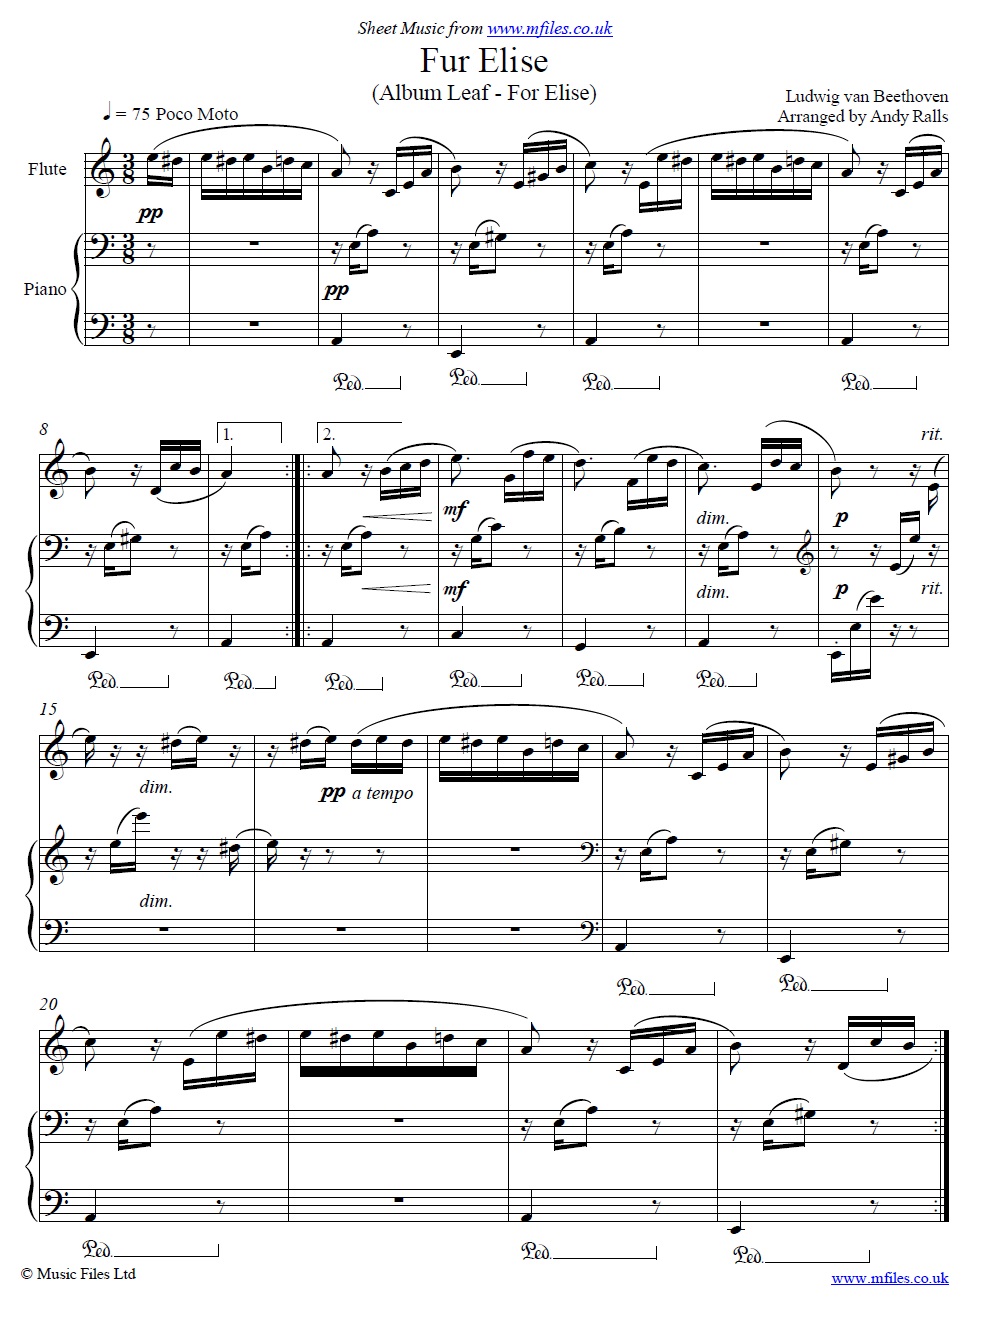 Musical Scores Free - dailytree